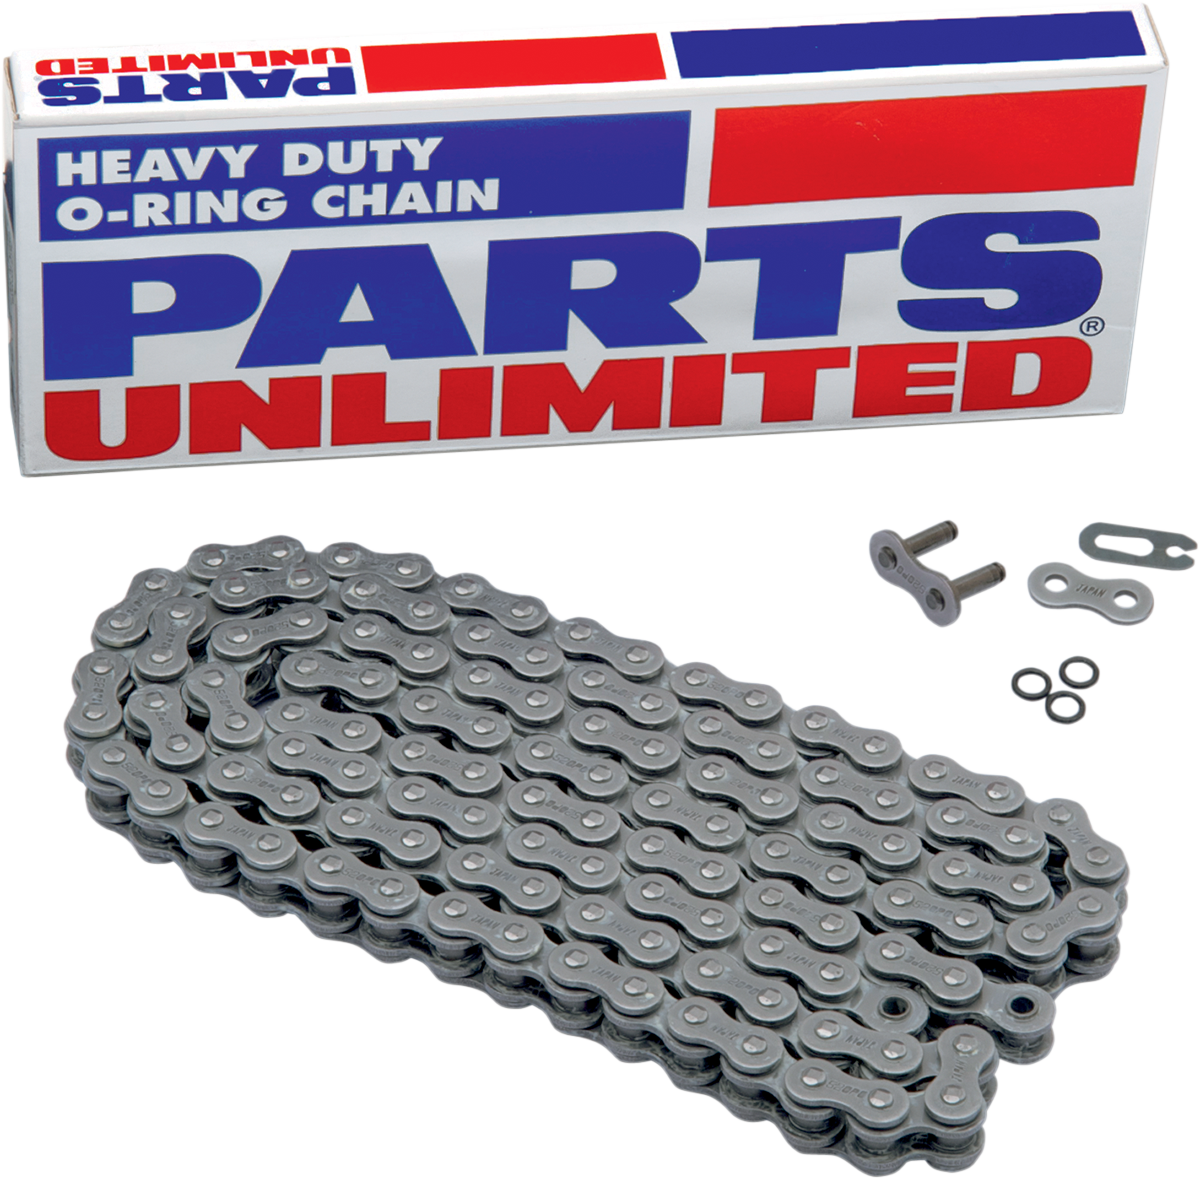 PARTS UNLIMITED-CHAIN MOTORCYCLE CHAIN CHAIN PU 520 O-RNG X 116L